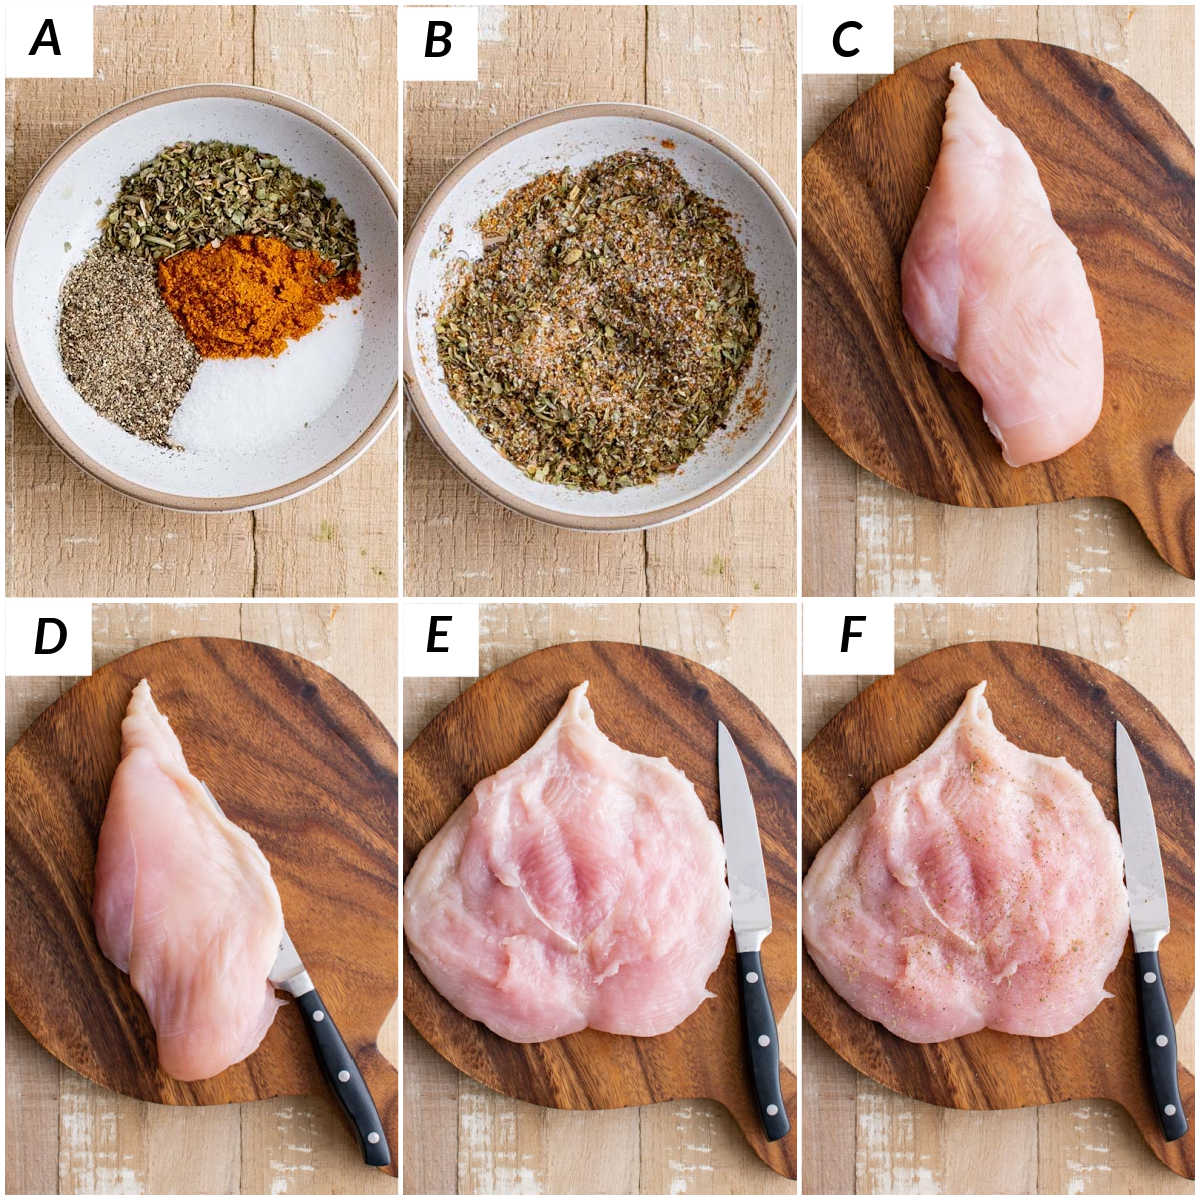 image collage showing the steps for making spinach stuffed chicken breast